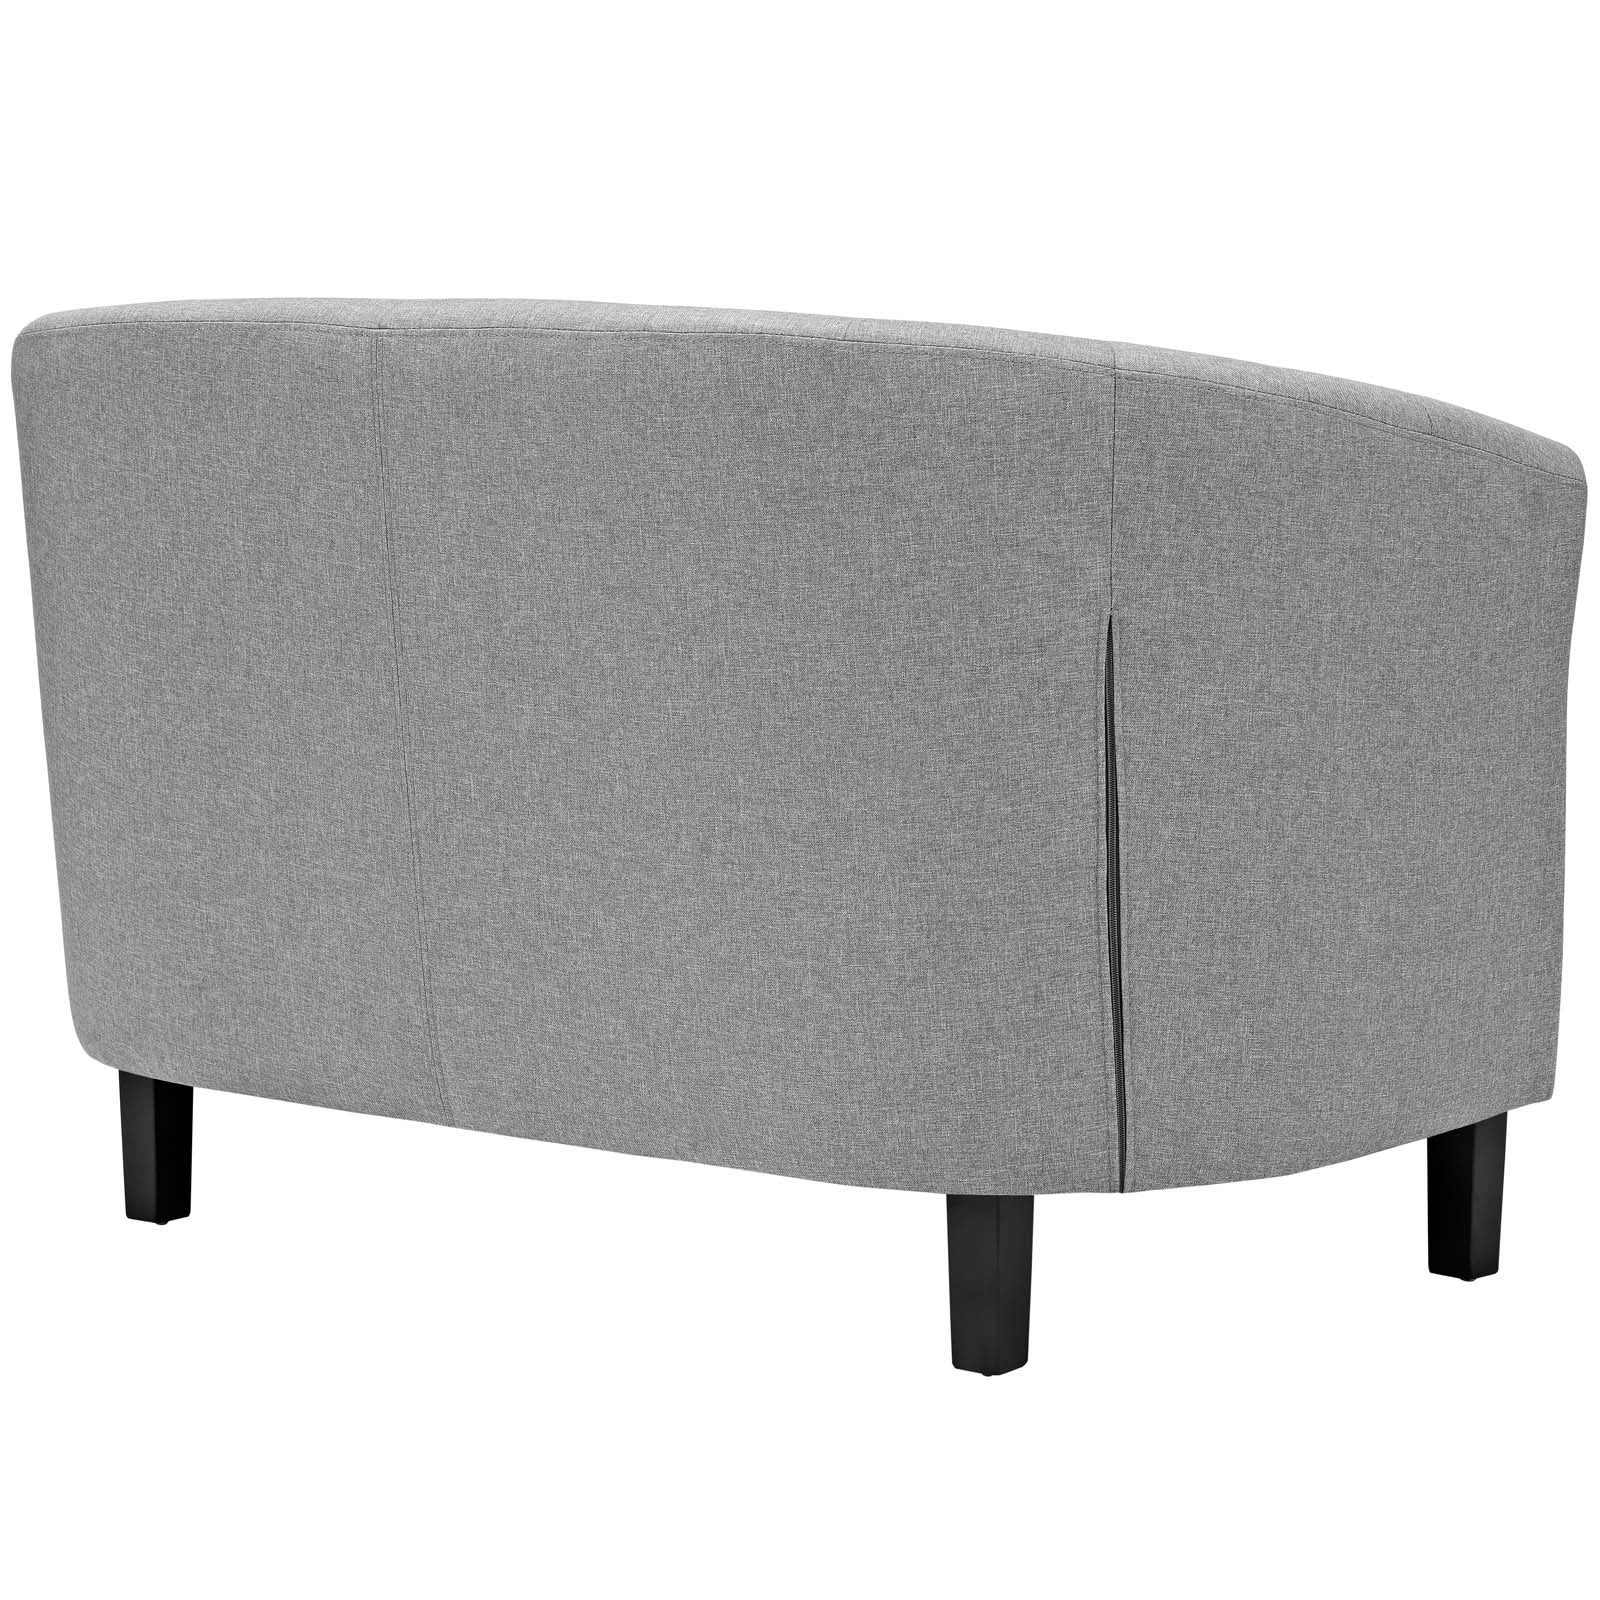 Modway Living Room Sets - Prospect 2 Piece Upholstered Fabric Loveseat and Armchair Set Light Gray